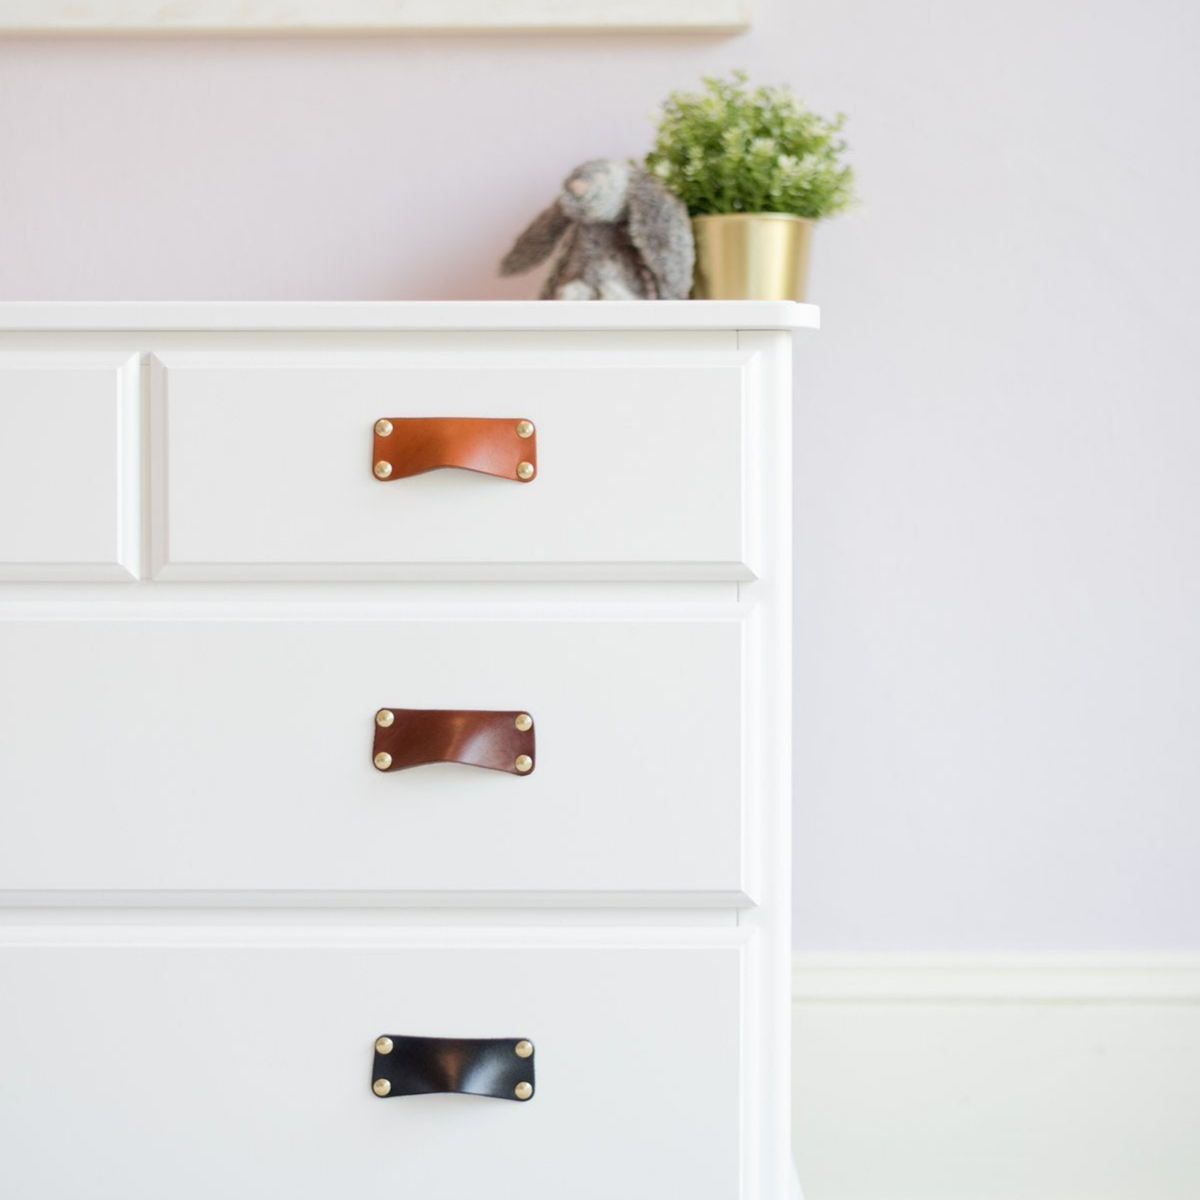 White IKEA HAUGA Chest of Drawers with the Walnut Leather Bin Pull installed in three different colors like an ombre rainbow, growing darker towards the floor.